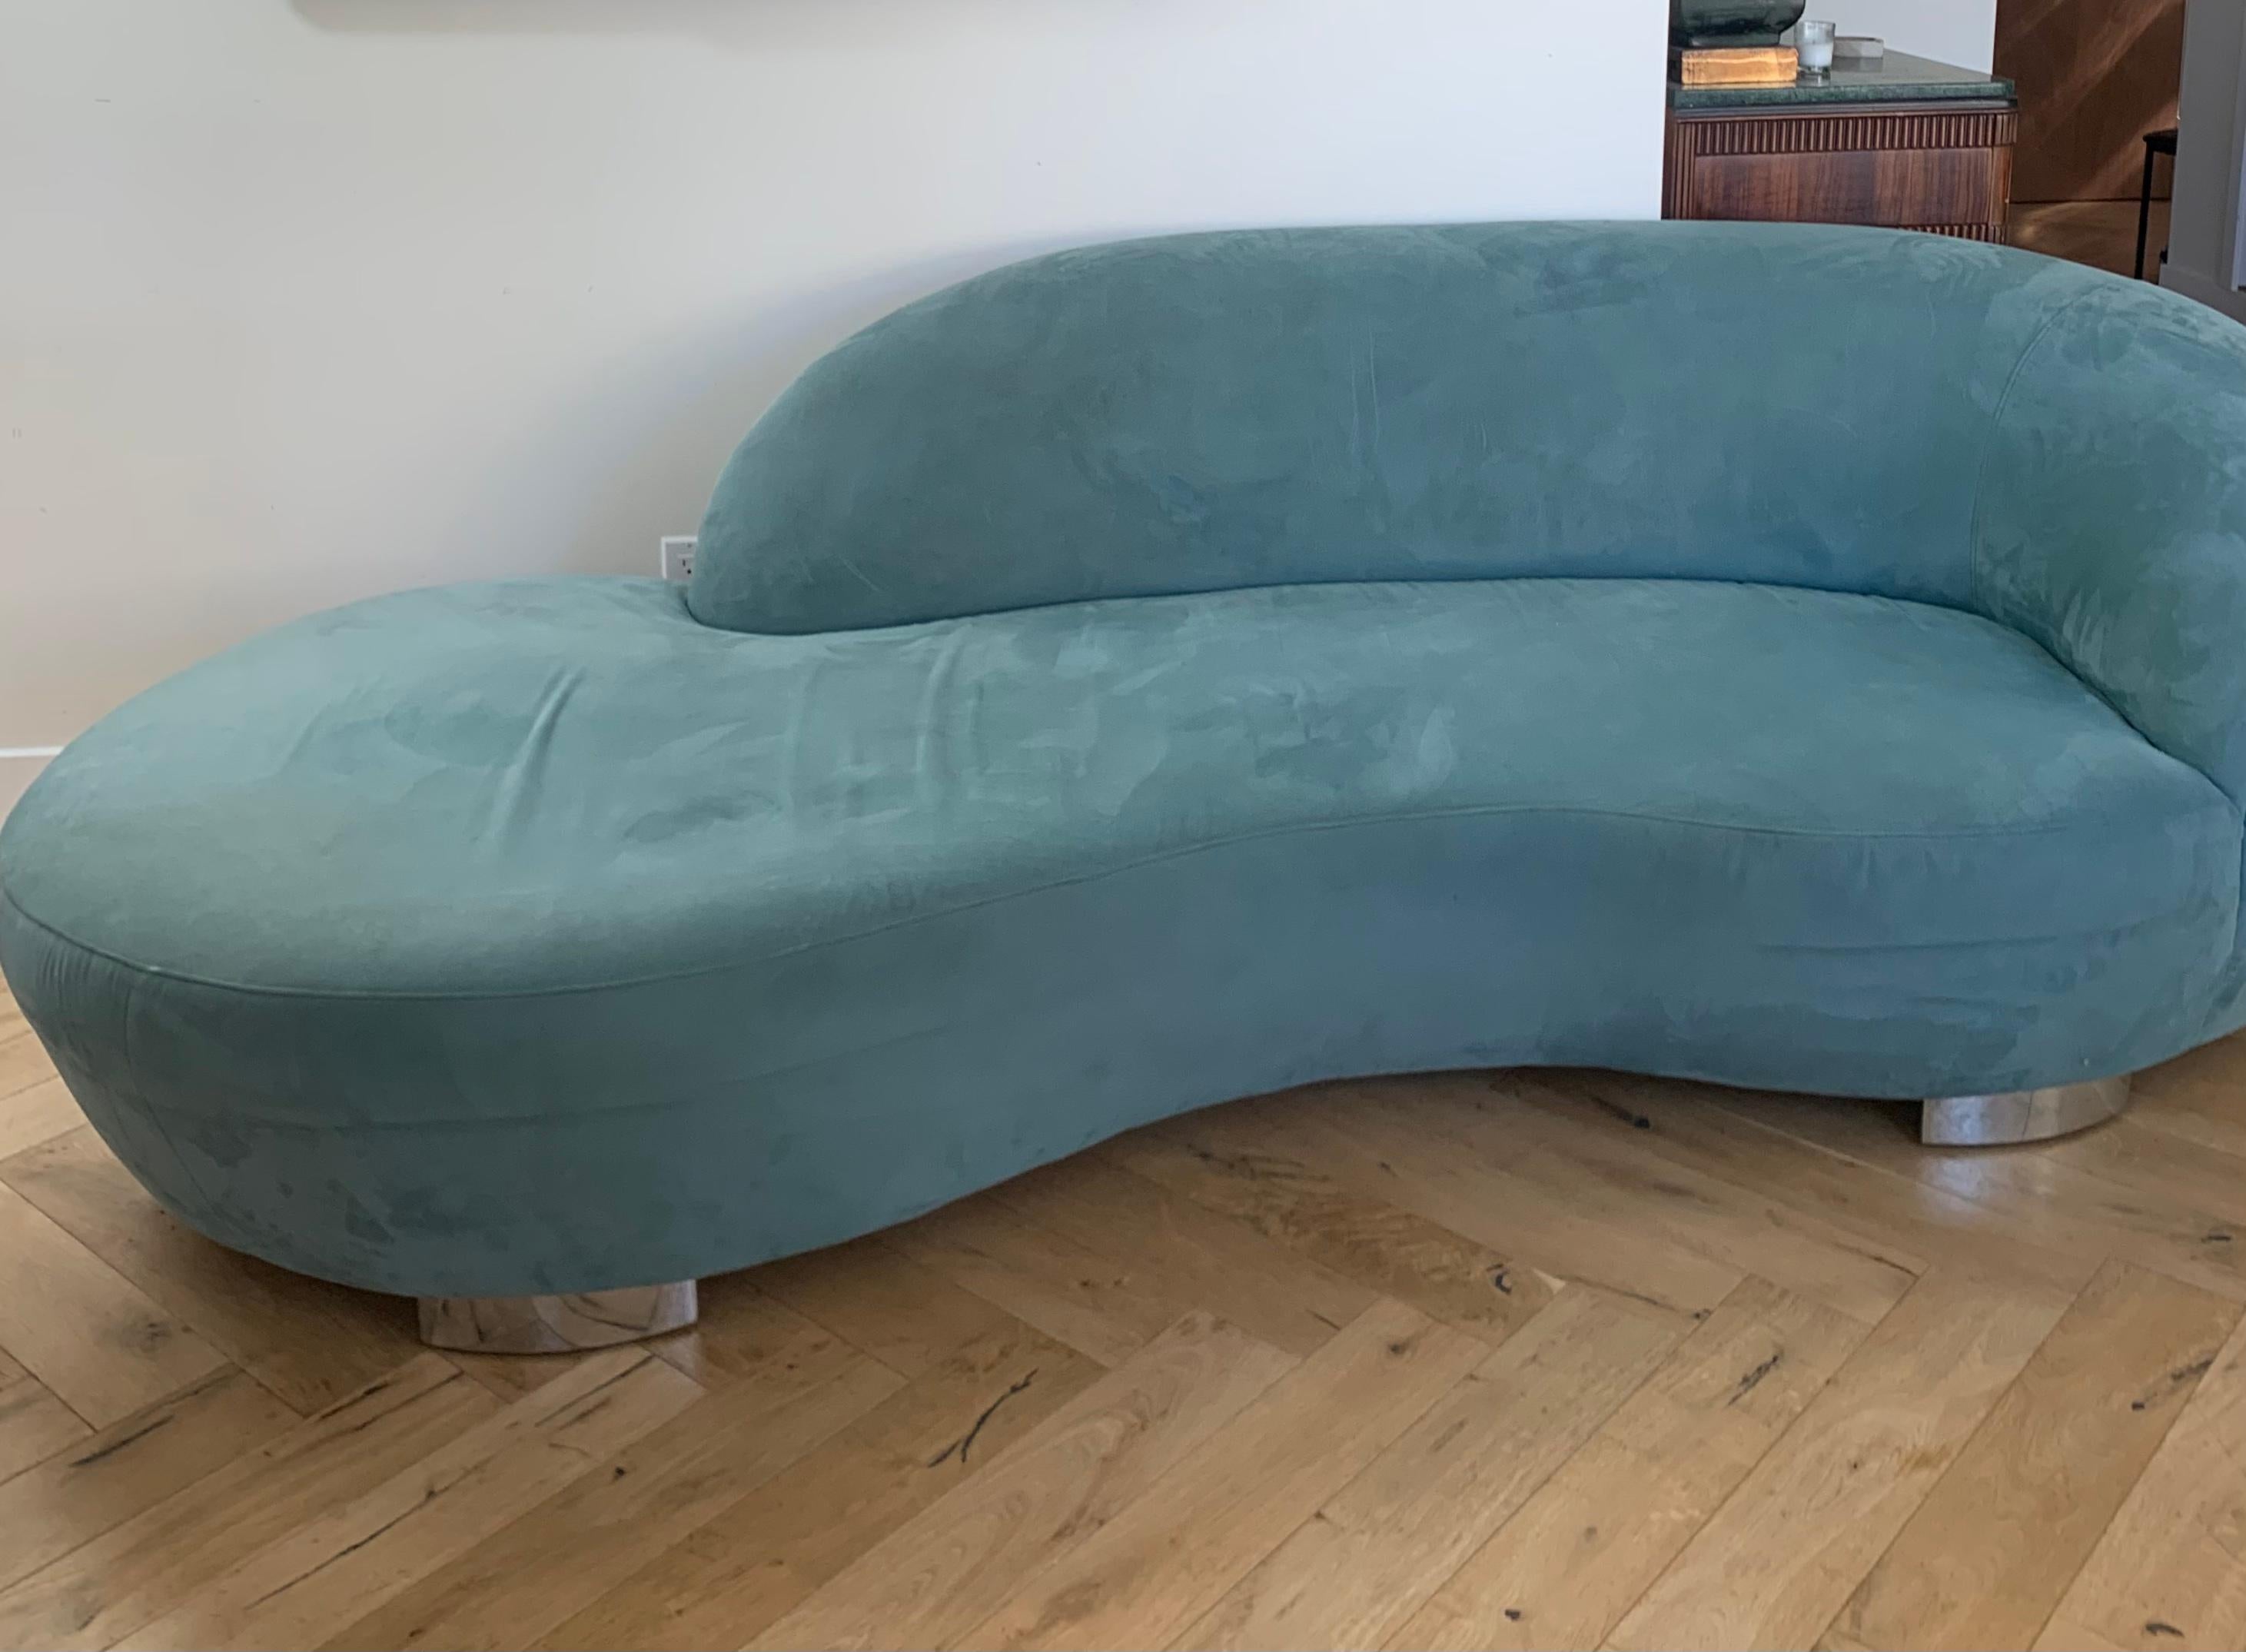 COOL BLUE: Kagan style serpentine sofa in powder blue microsuede with chrome base. Wavy seat with asymmetrical sofa back - possibly real Kagan but cannot authenticate and do the price is a fraction. Light wear to the upholstery but overall quite fab